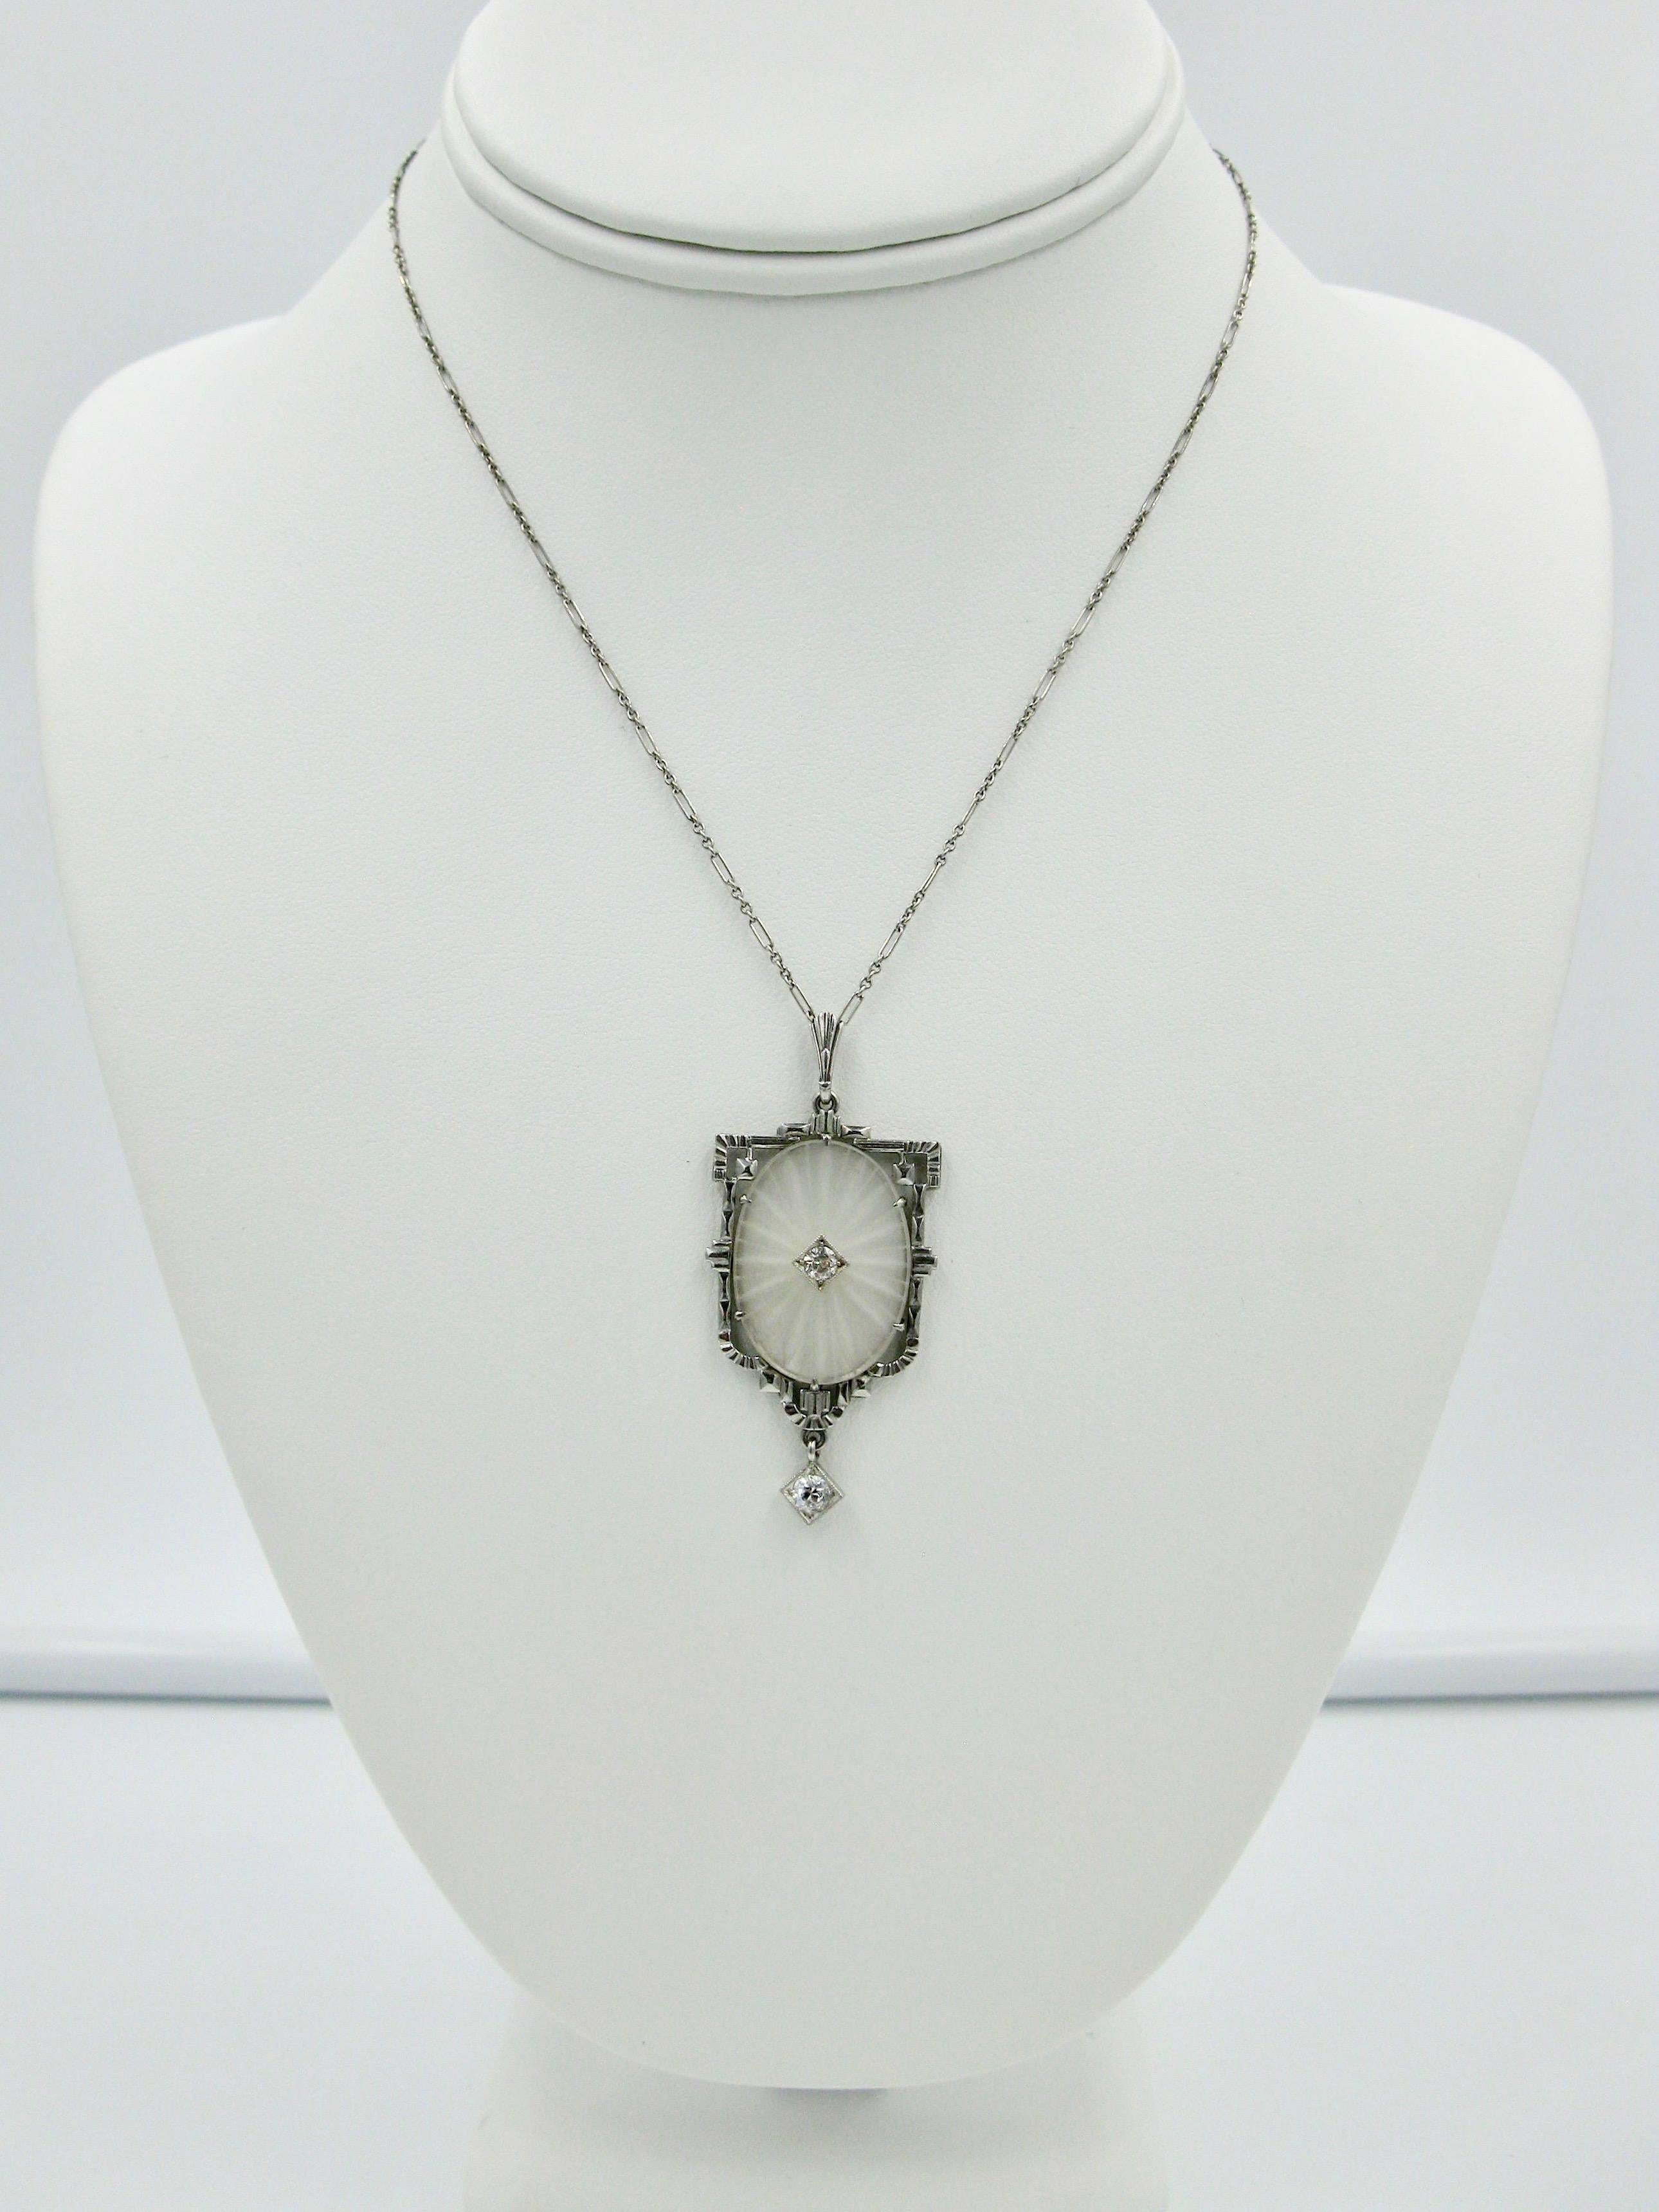 Art Deco Old European Cut Diamond Crystal Pendant Necklace 14 Karat White Gold In Good Condition For Sale In New York, NY